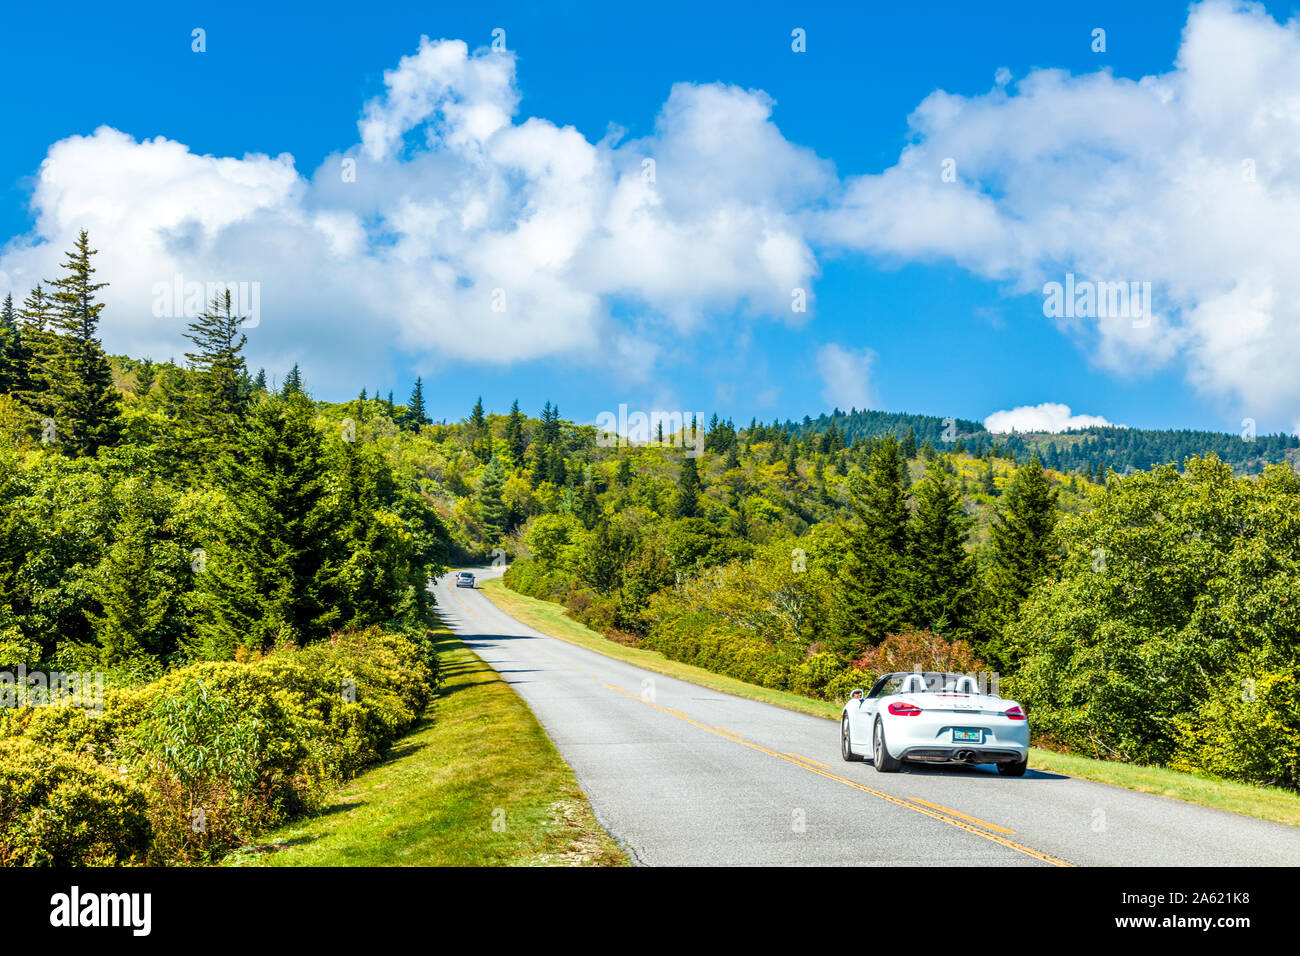 Blue Ridge Parkway in the Smoky Mountains of North Carolina in the Unted States Stock Photo